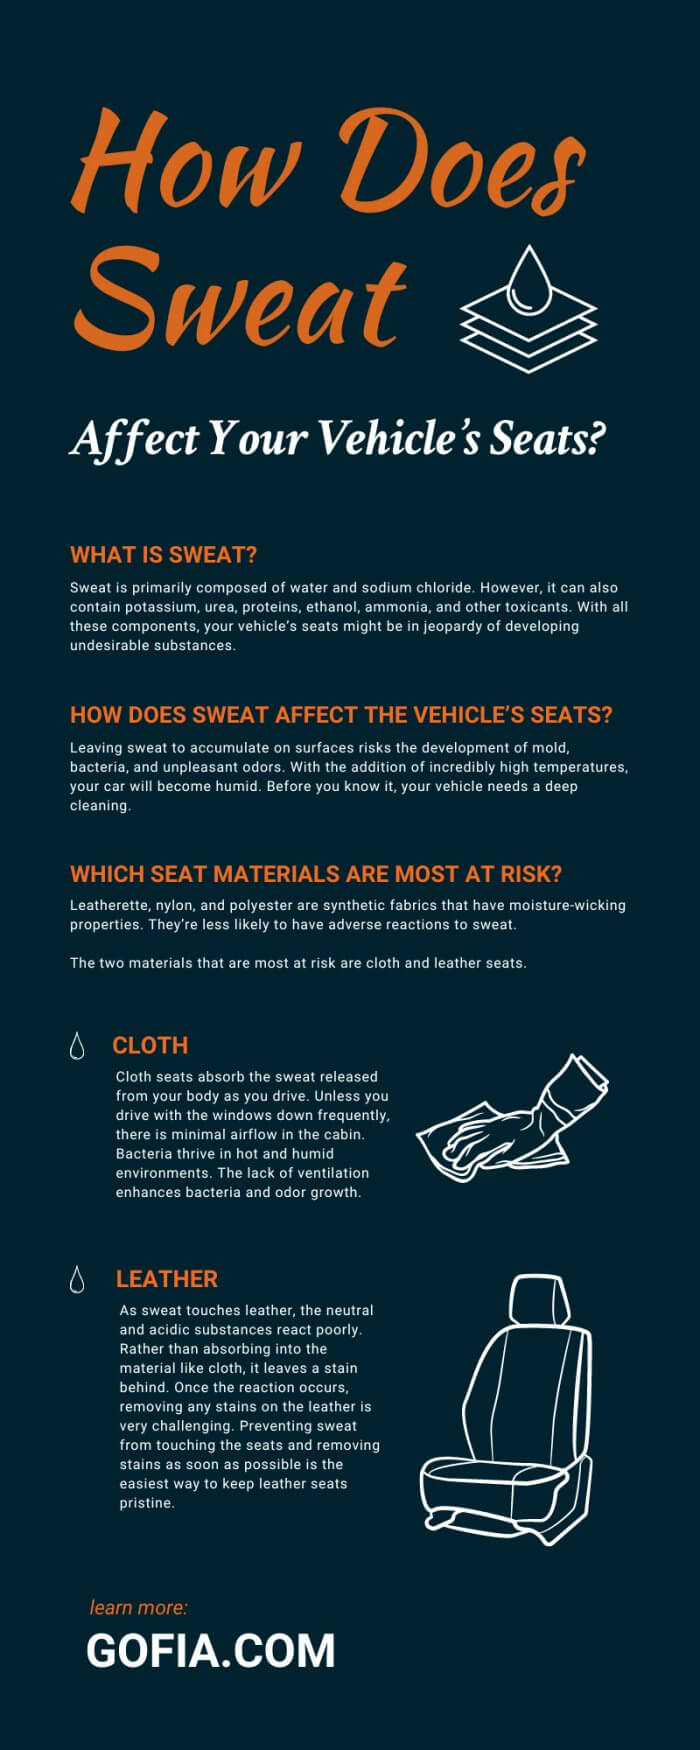 How Does Sweat Affect Your Vehicle’s Seats?